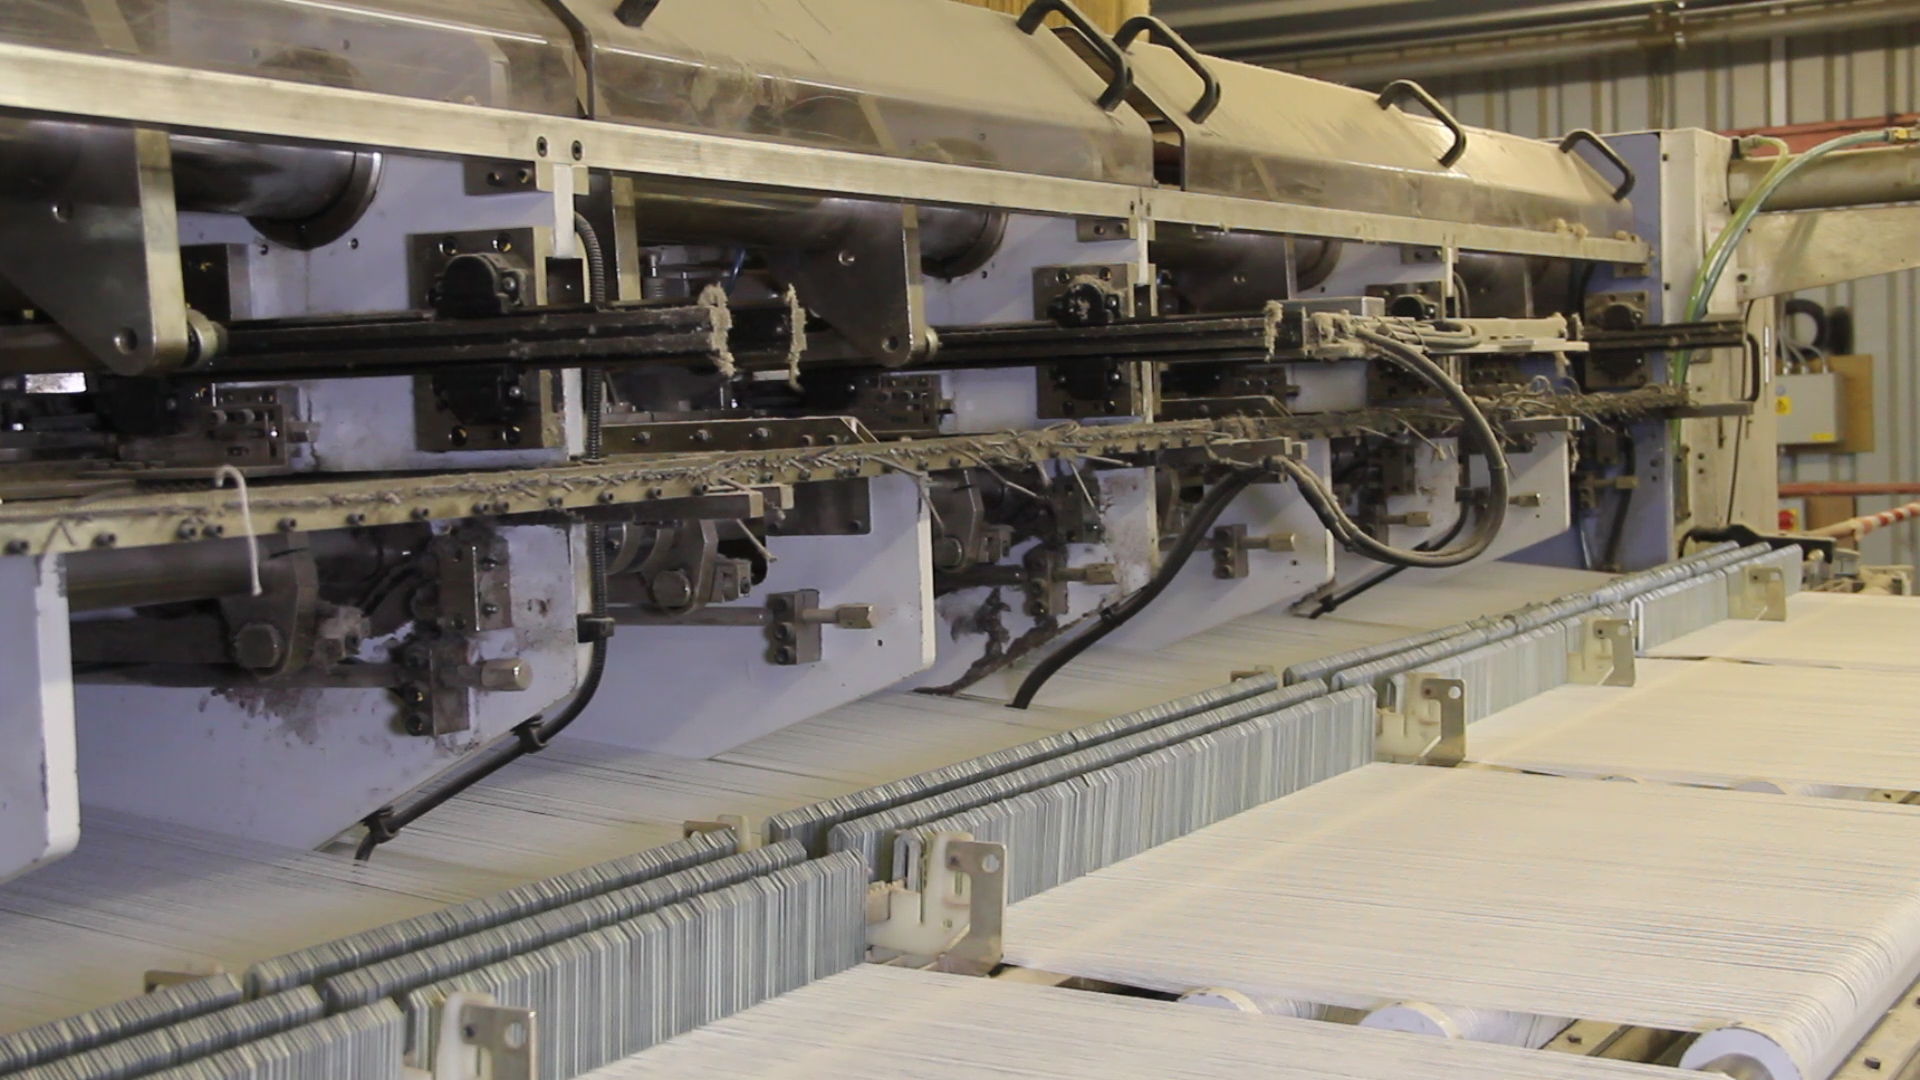 10 Years & 20 Million Cycles - Linear Guides Going Strong in Textile Application